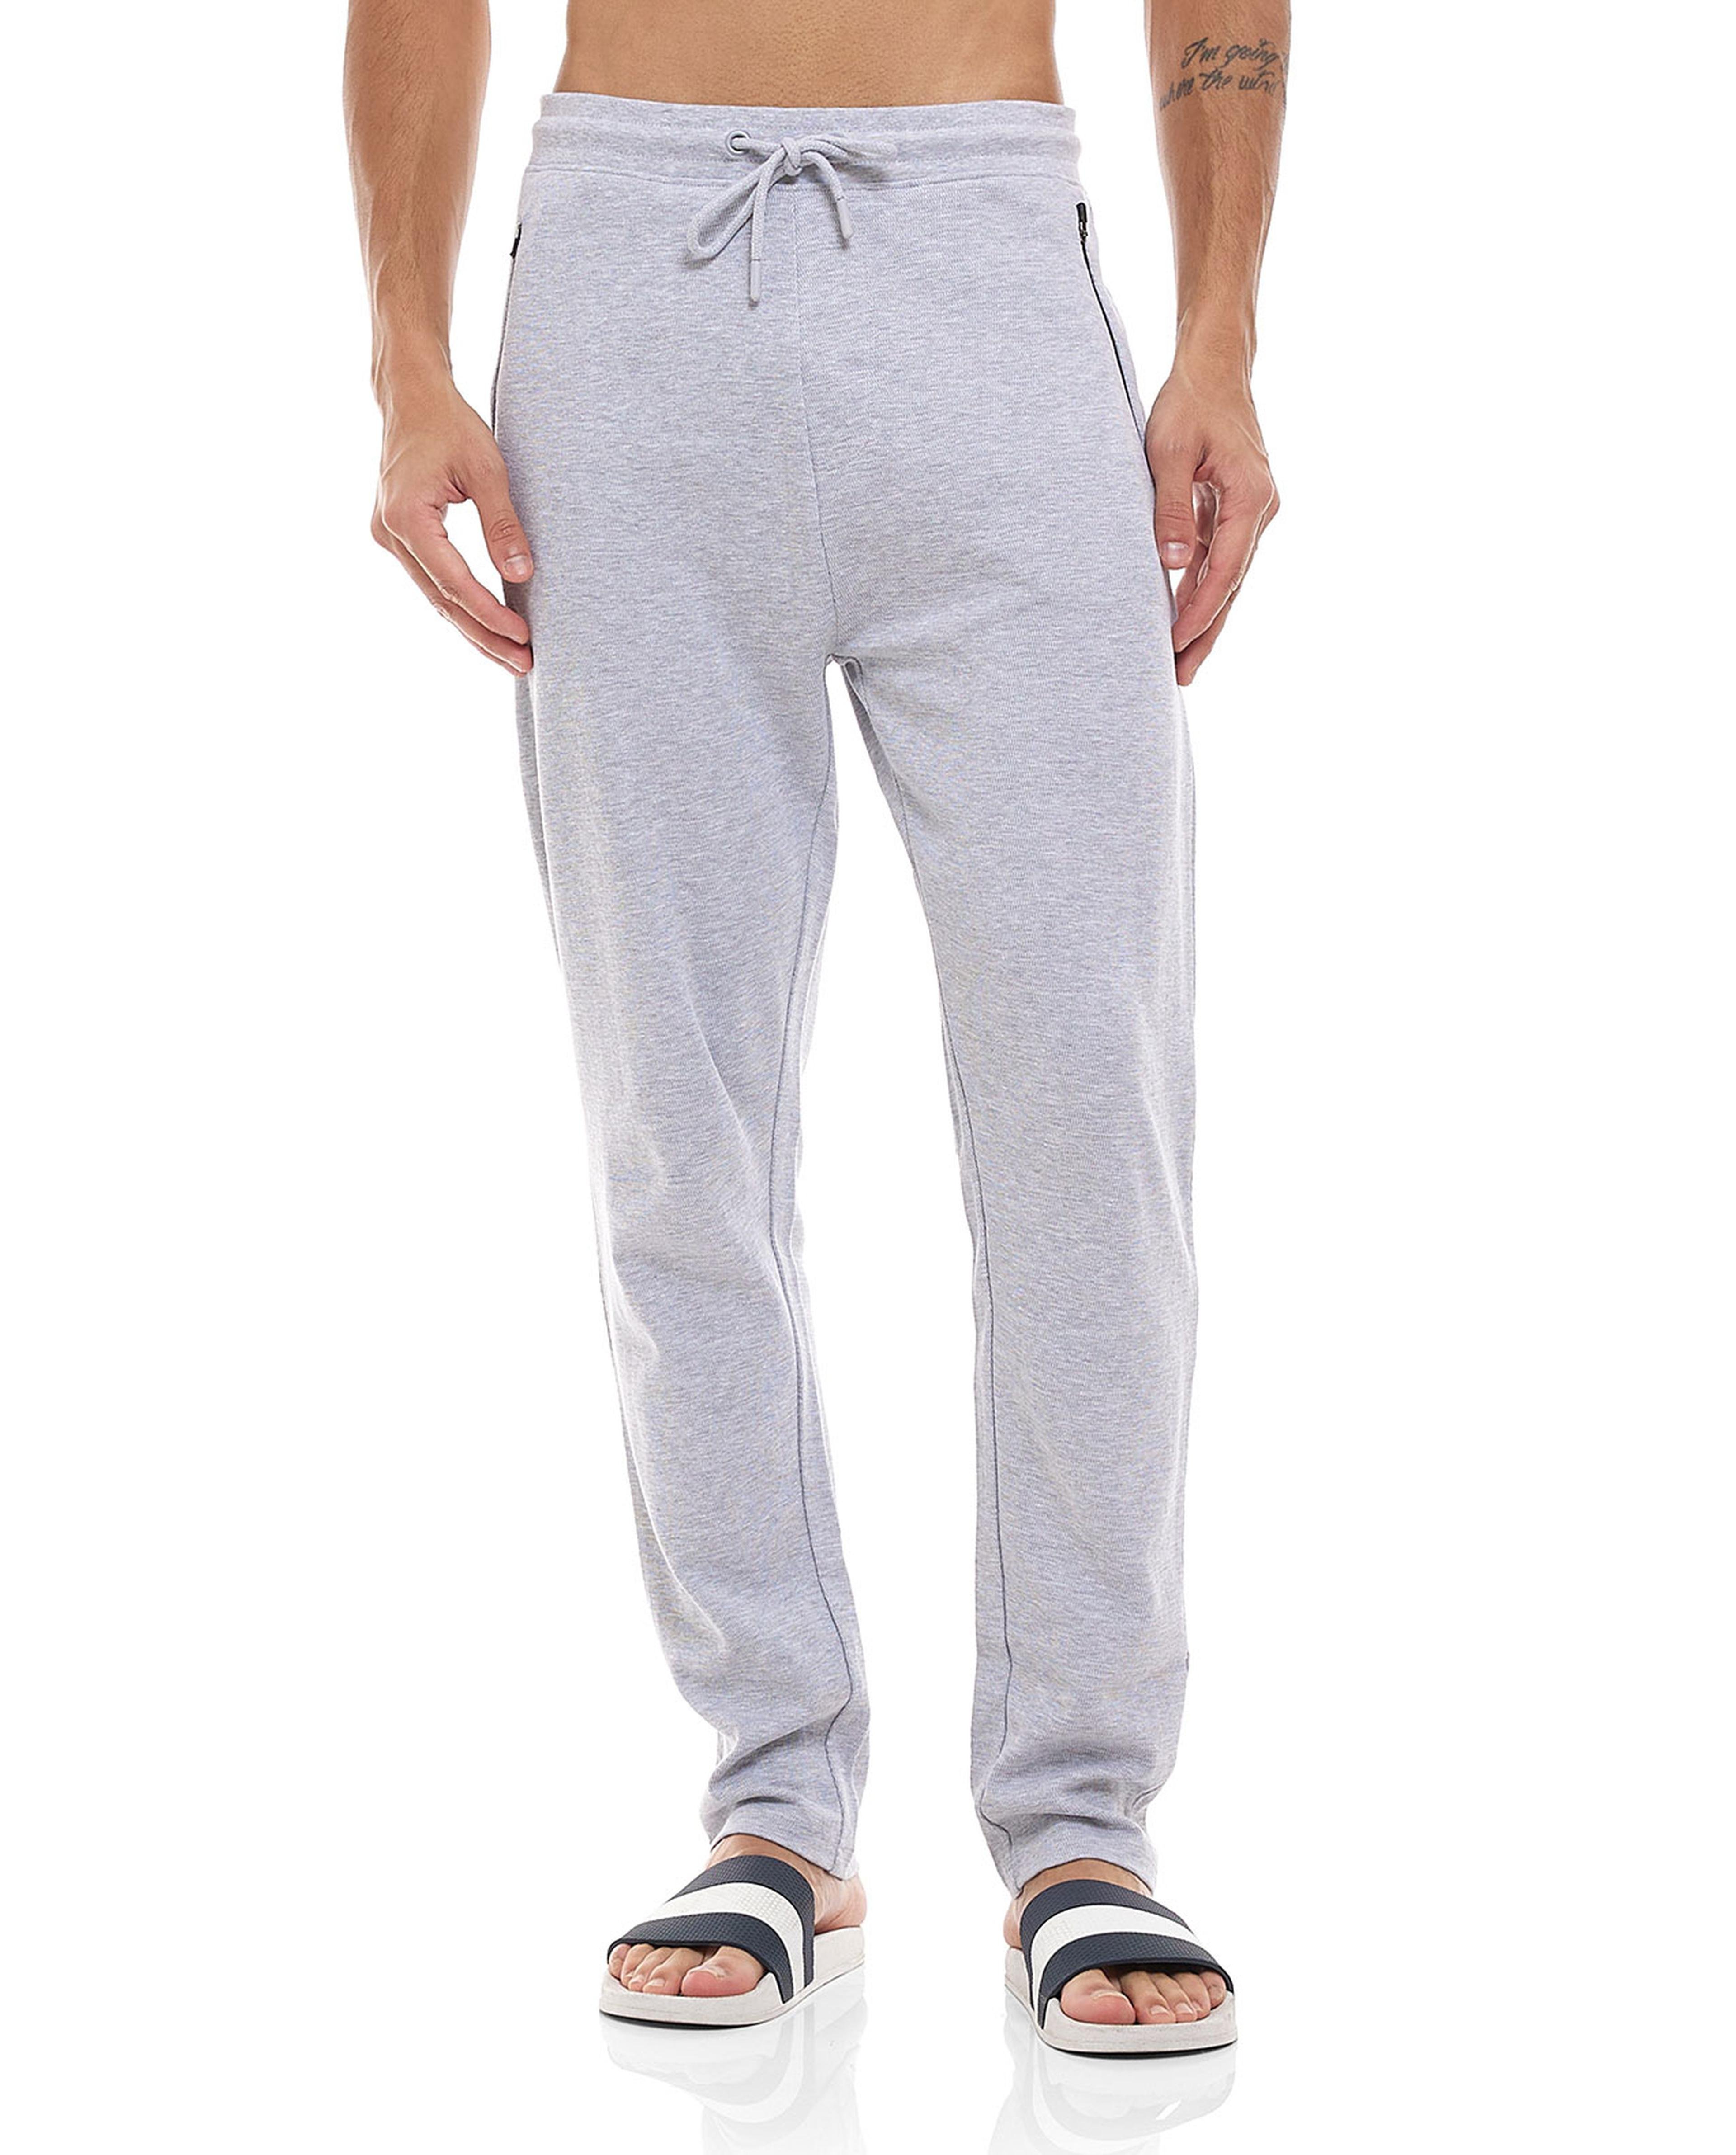 Solid Lounge Pants with Drawstring Waist